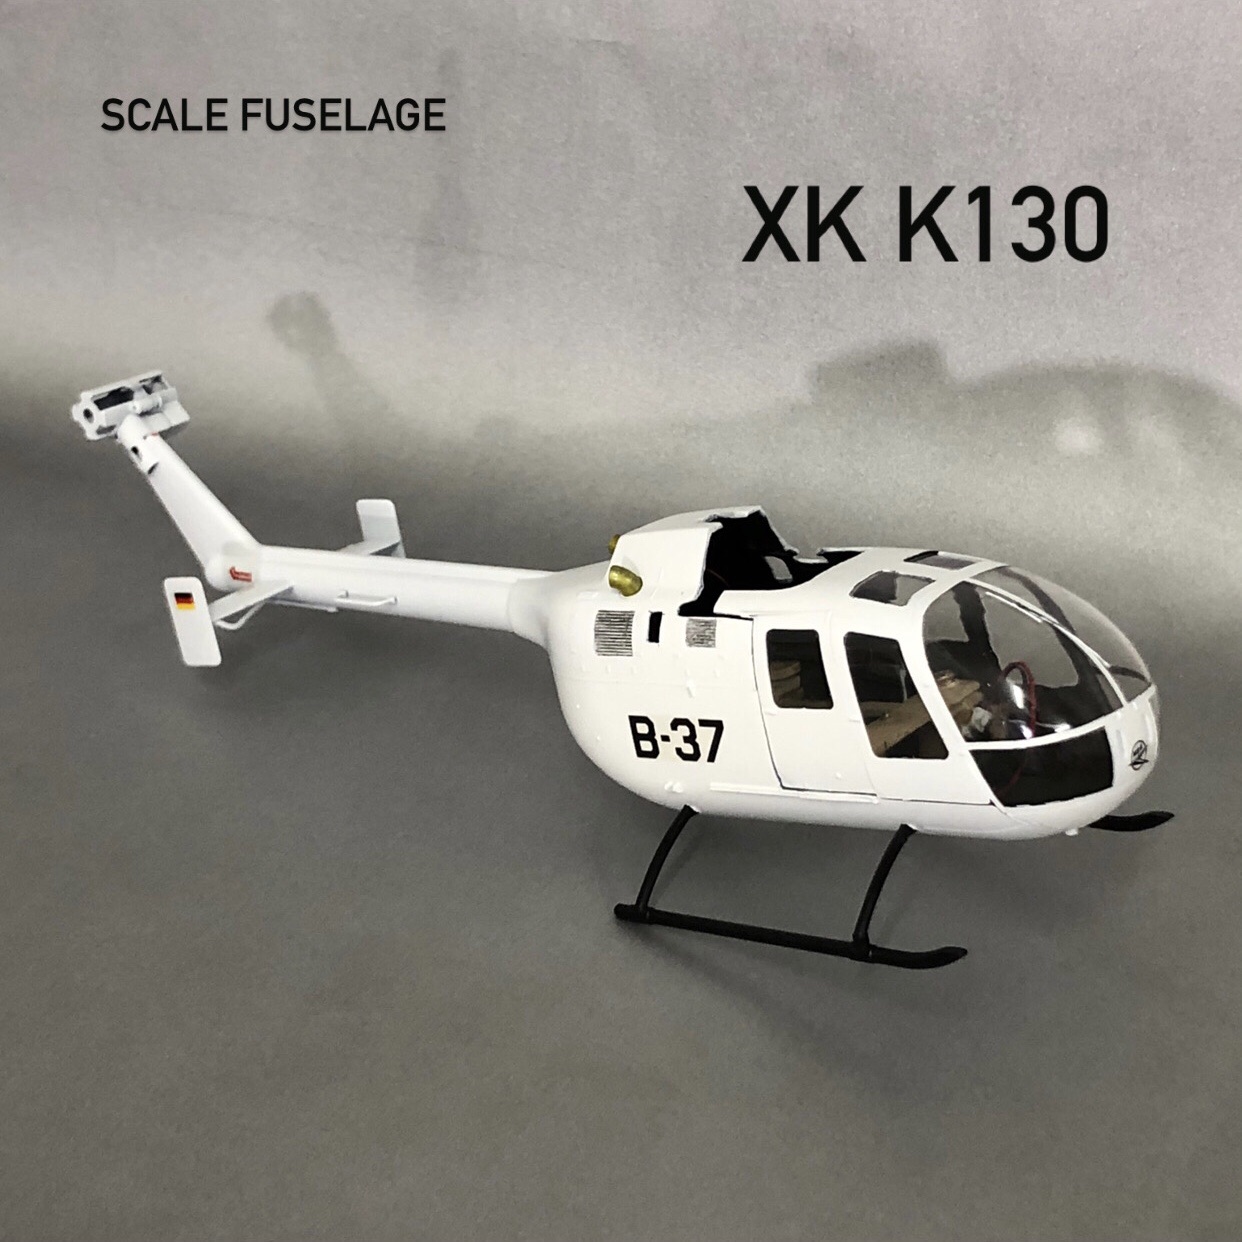 Rc helicopter scale fuselage for XK K130  white (bo105) บอดี้สเกล เฮลิคอปเตอร์บังคับ